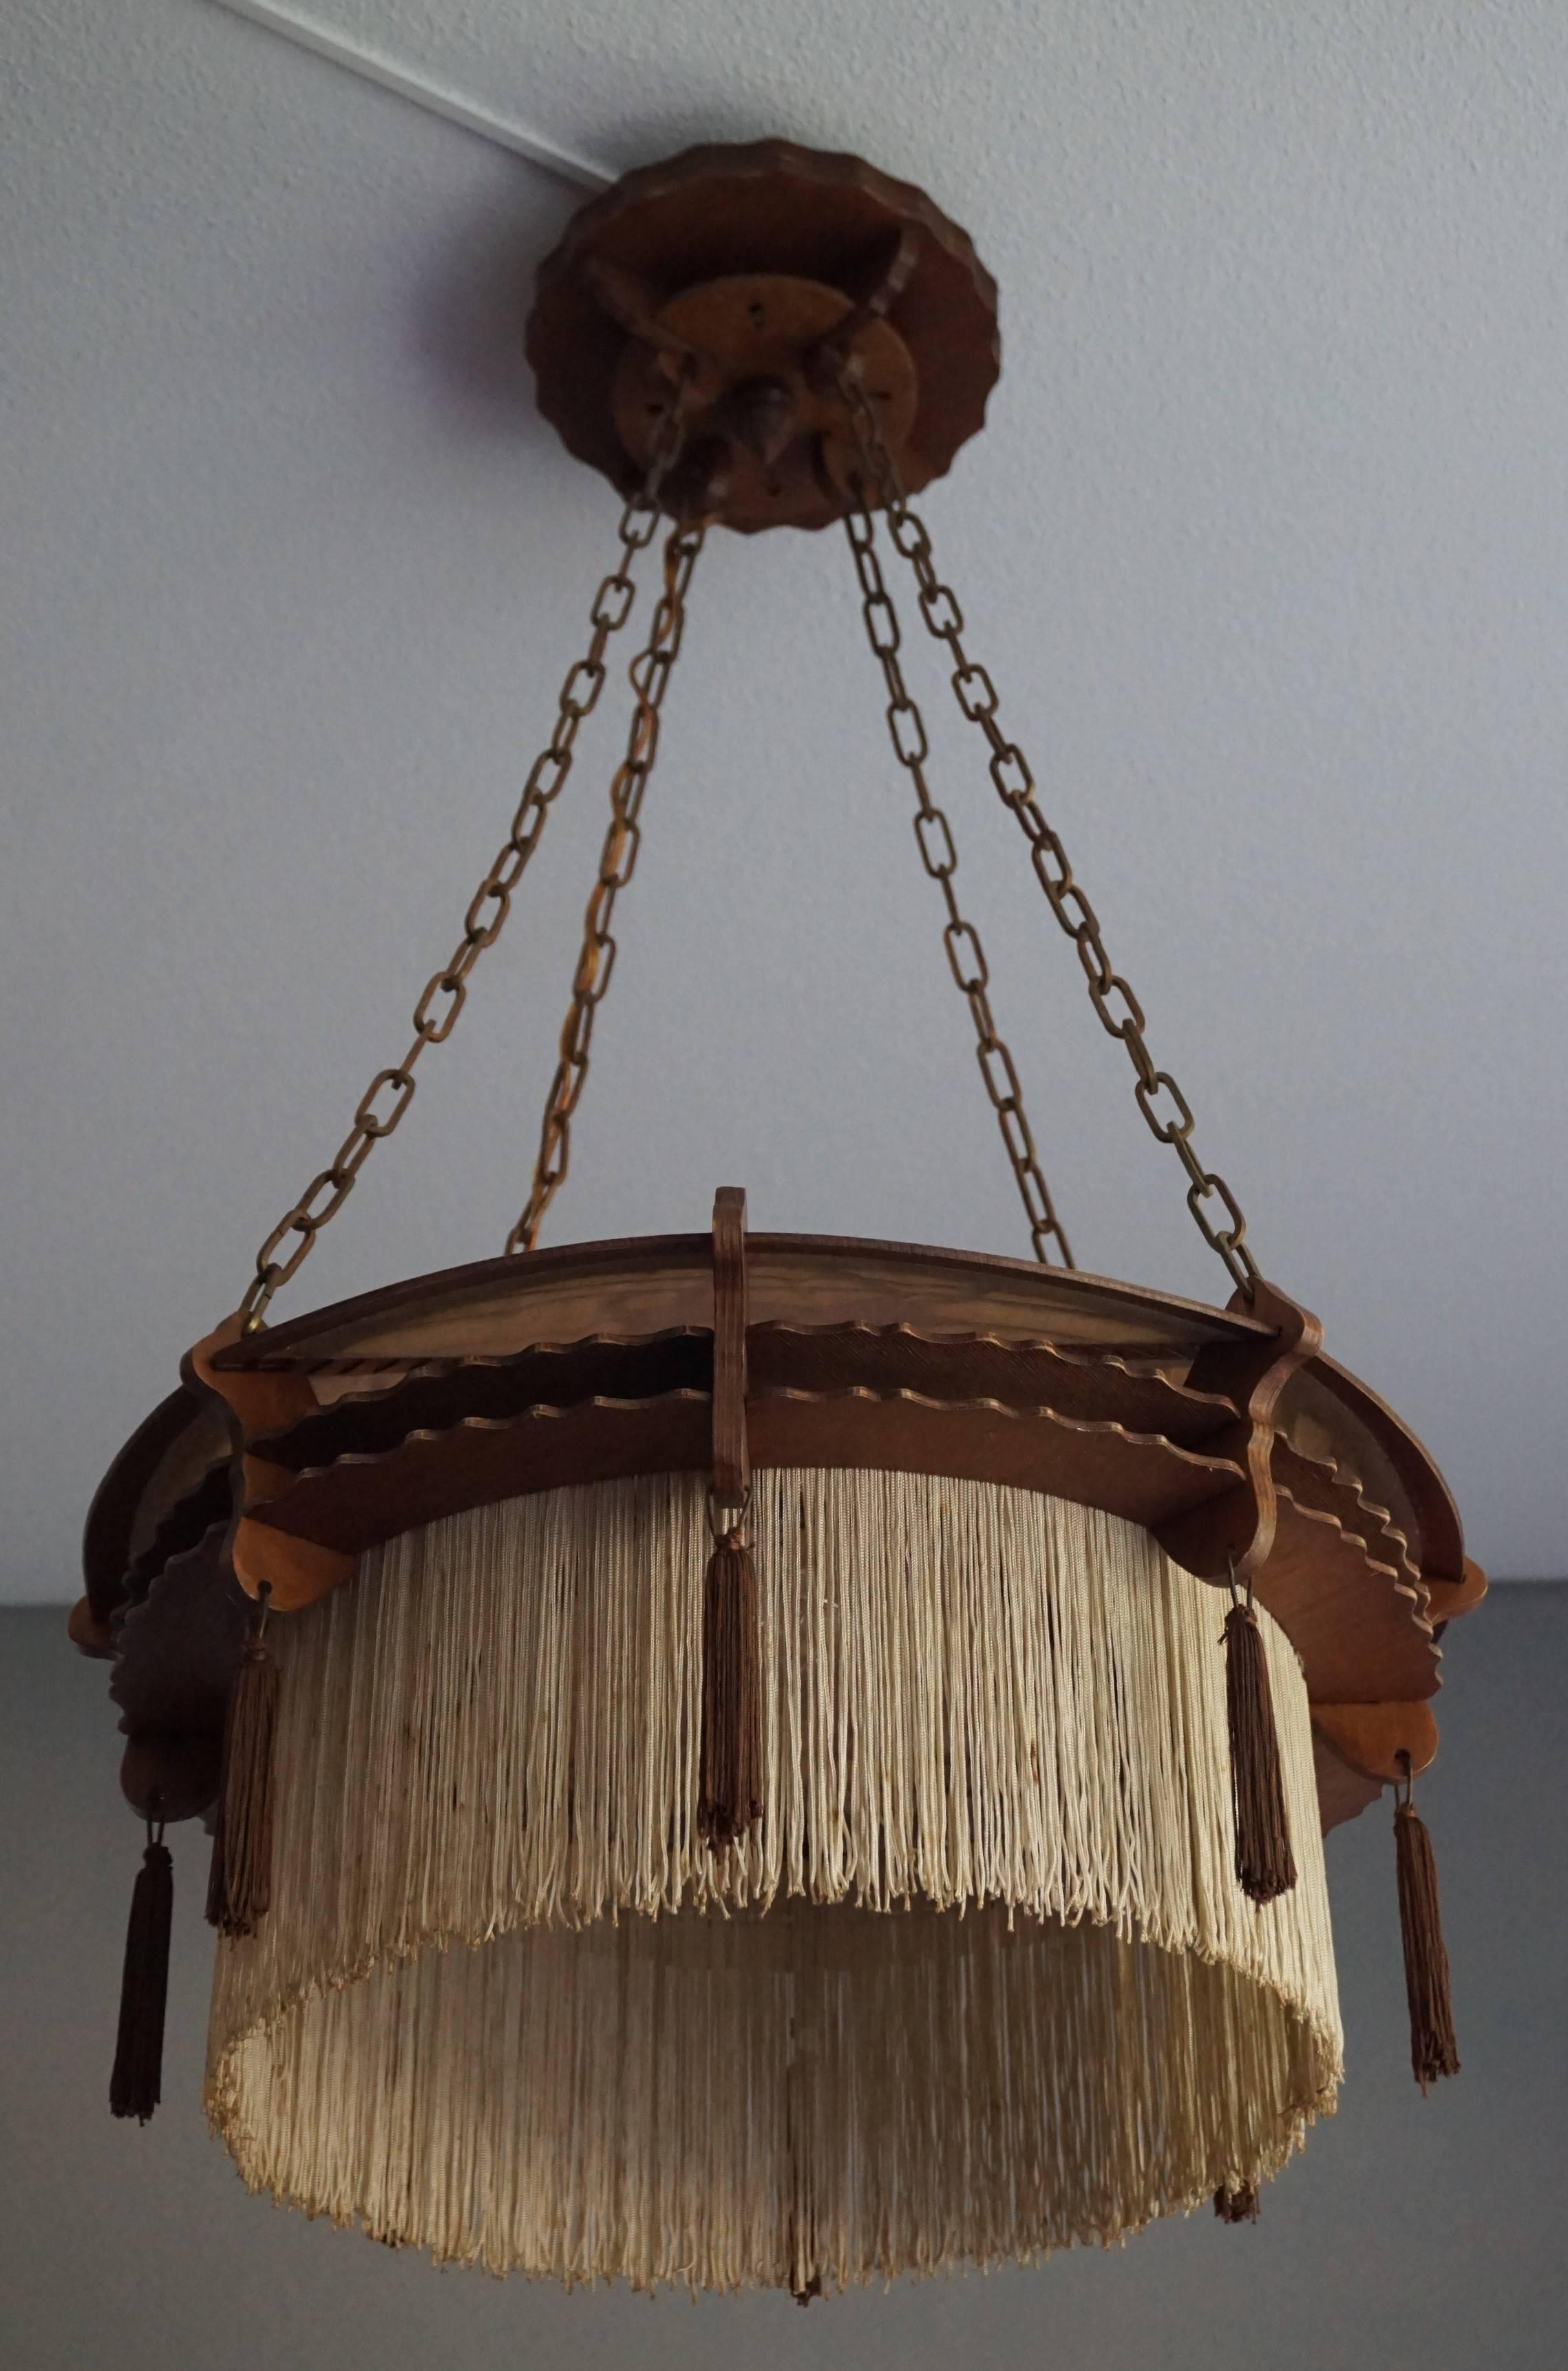 Early 20th Century Arts & Crafts Handsawn Wooden Pendant with Tassels & Fringes 6